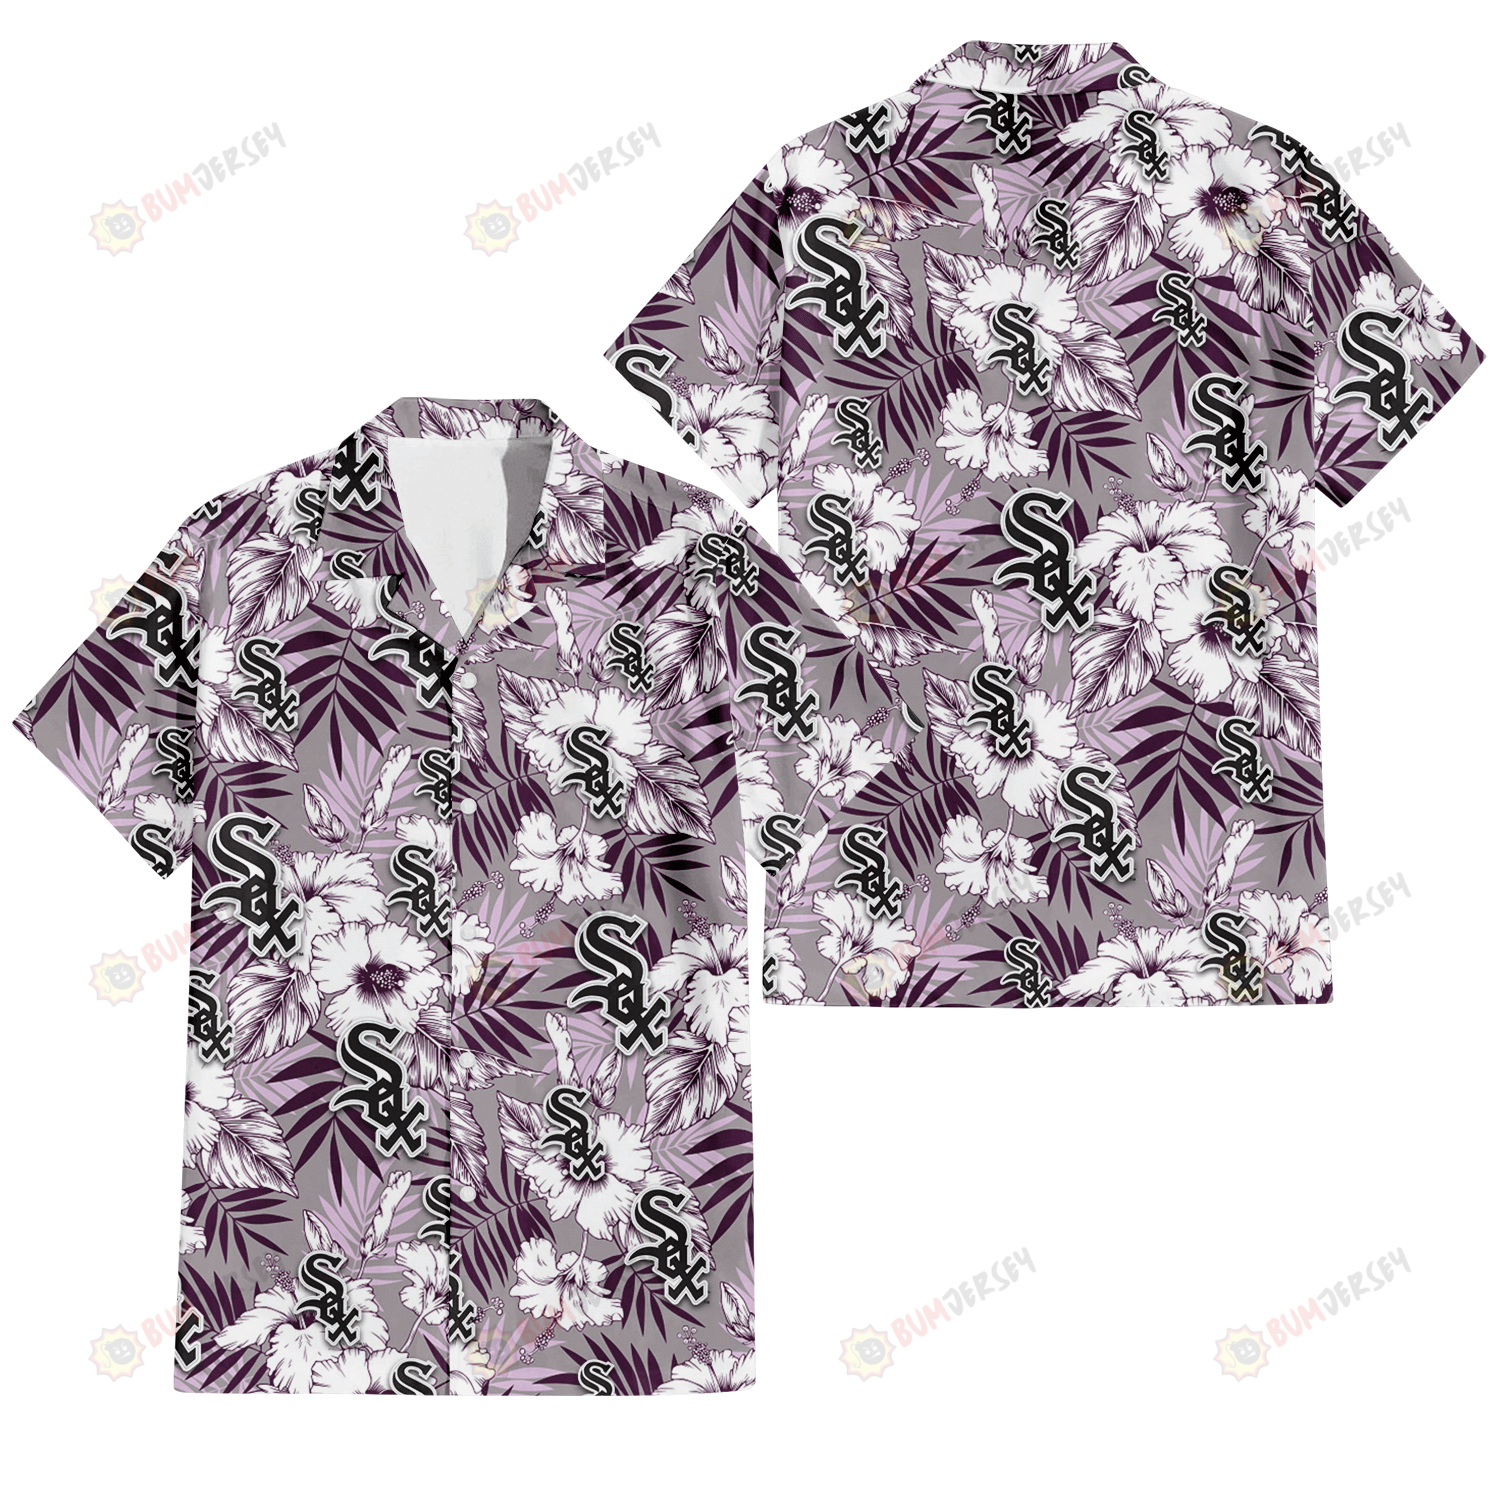 Chicago White Sox White Hibiscus Violet Leaves Light Grey Background 3D Hawaiian Shirt